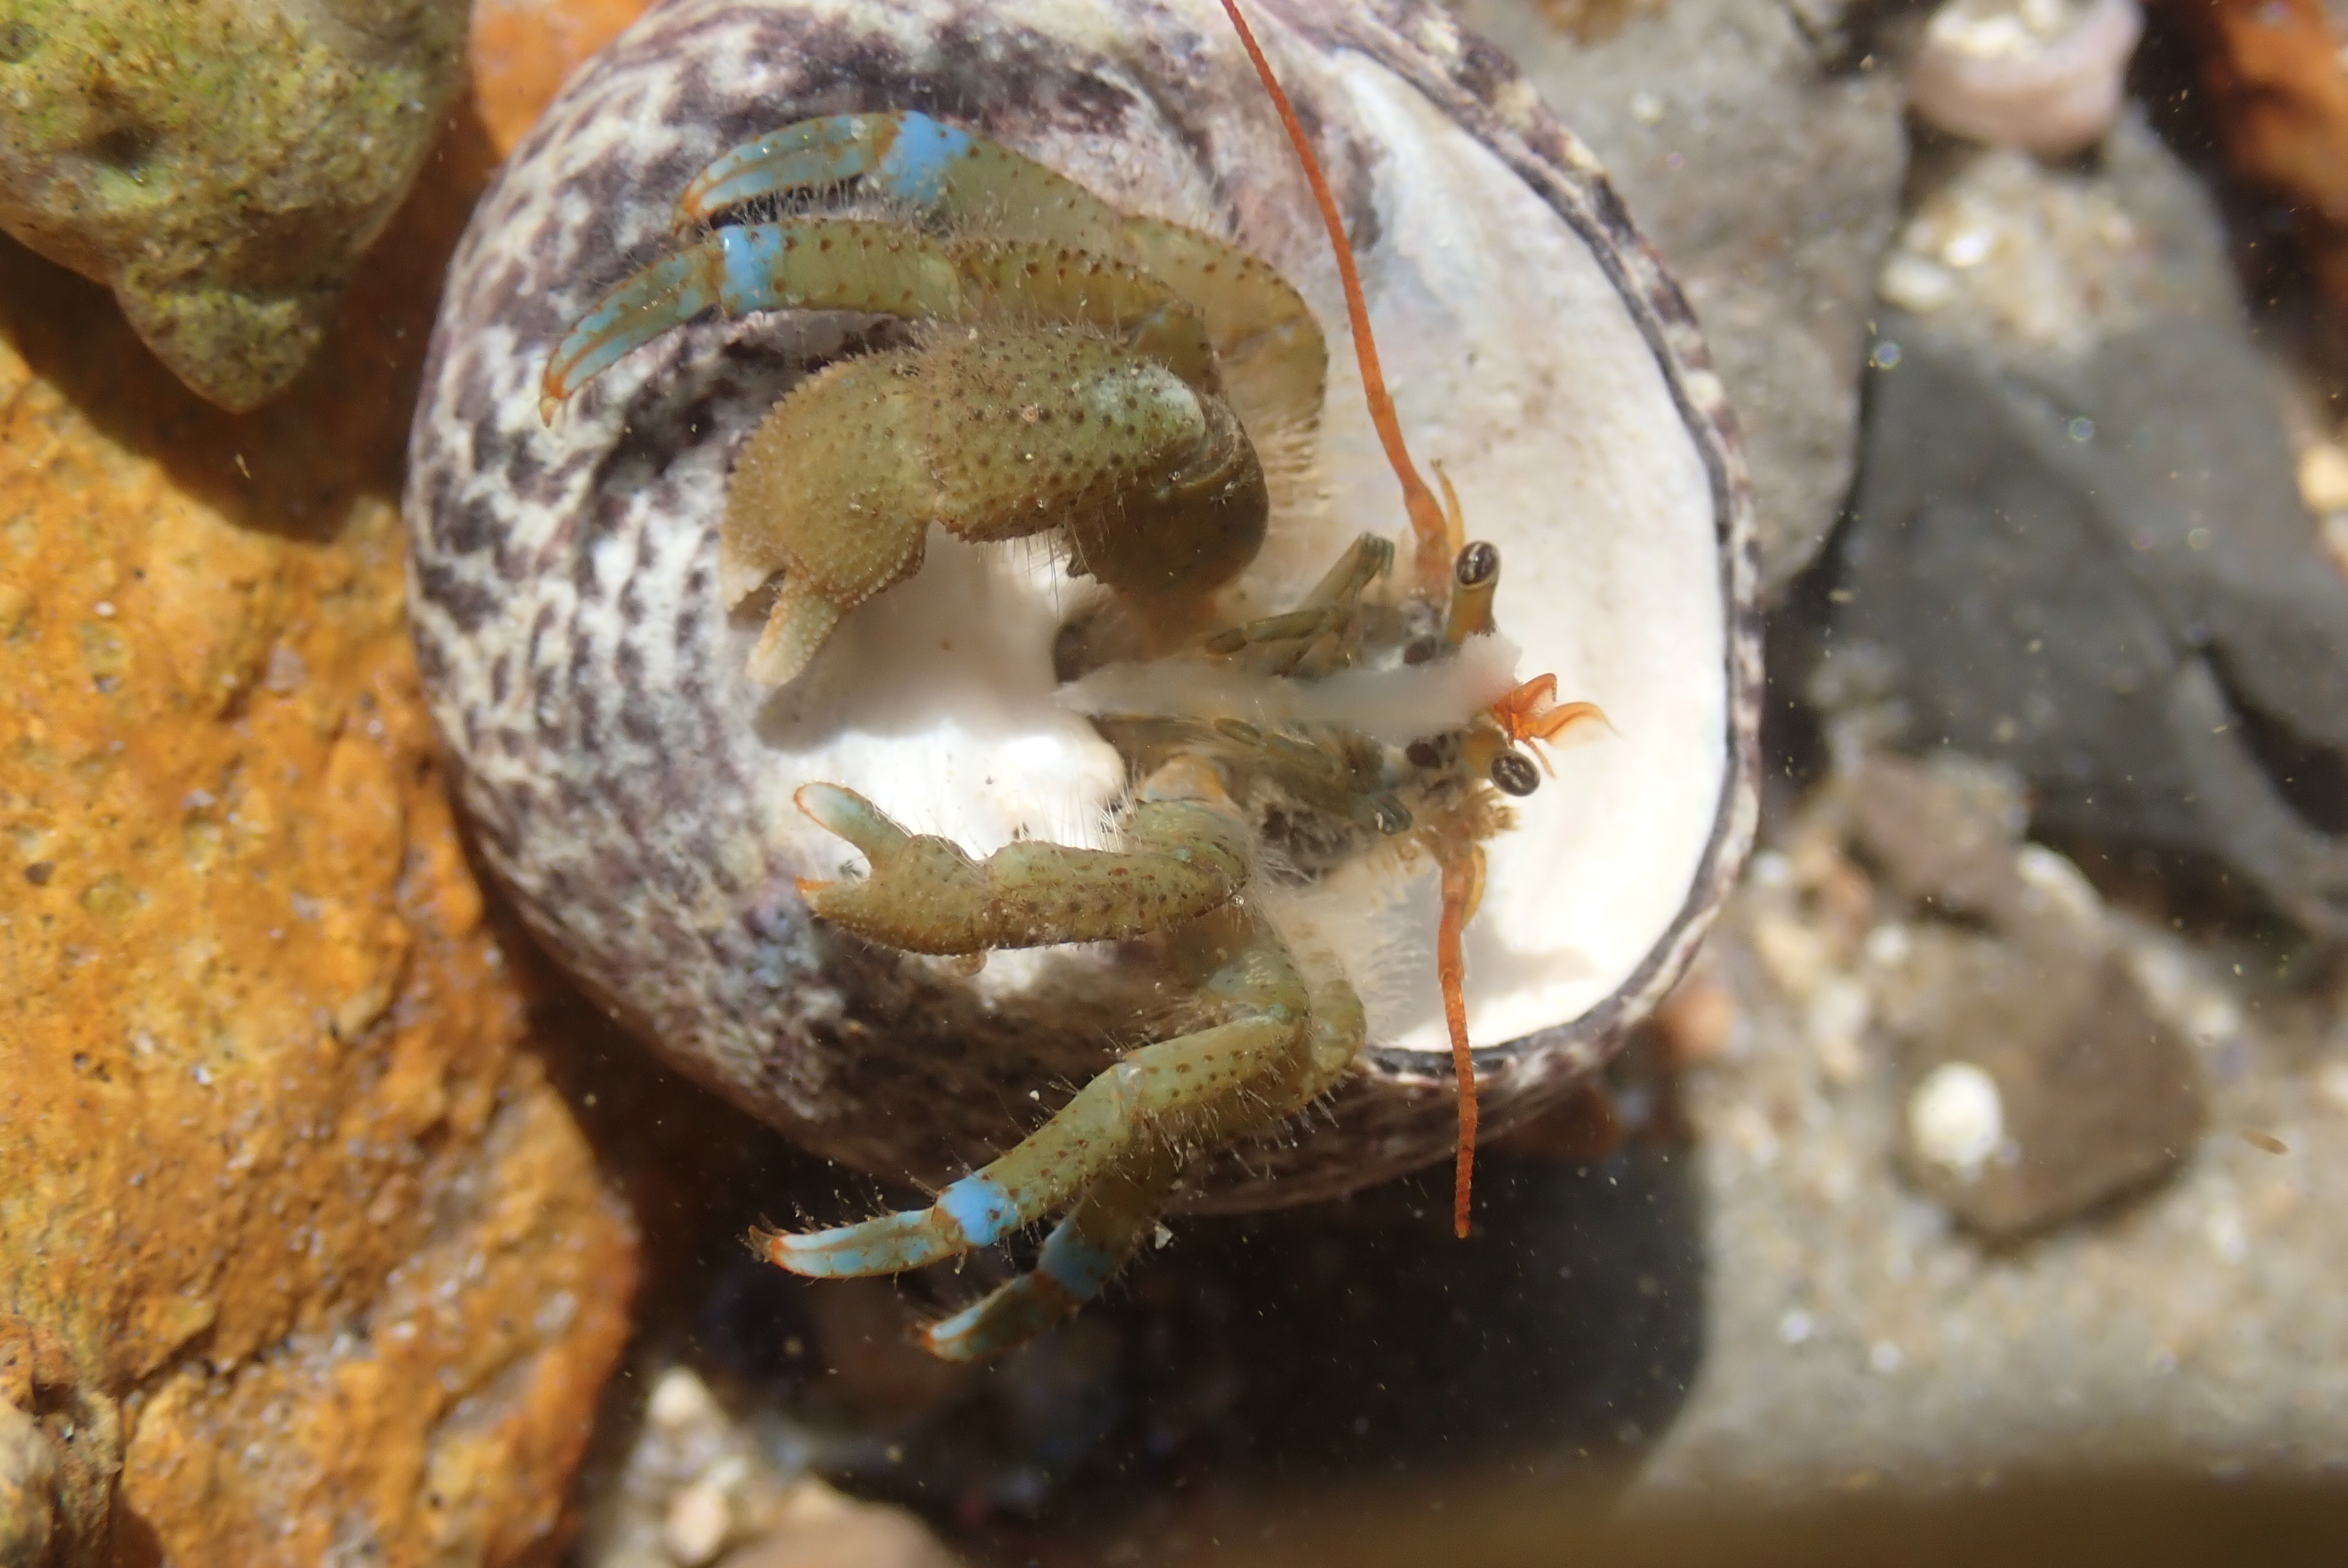 Hermit Crab, crab in the tide pools, tide pool animals, crustaceans, blue banded hermit crab